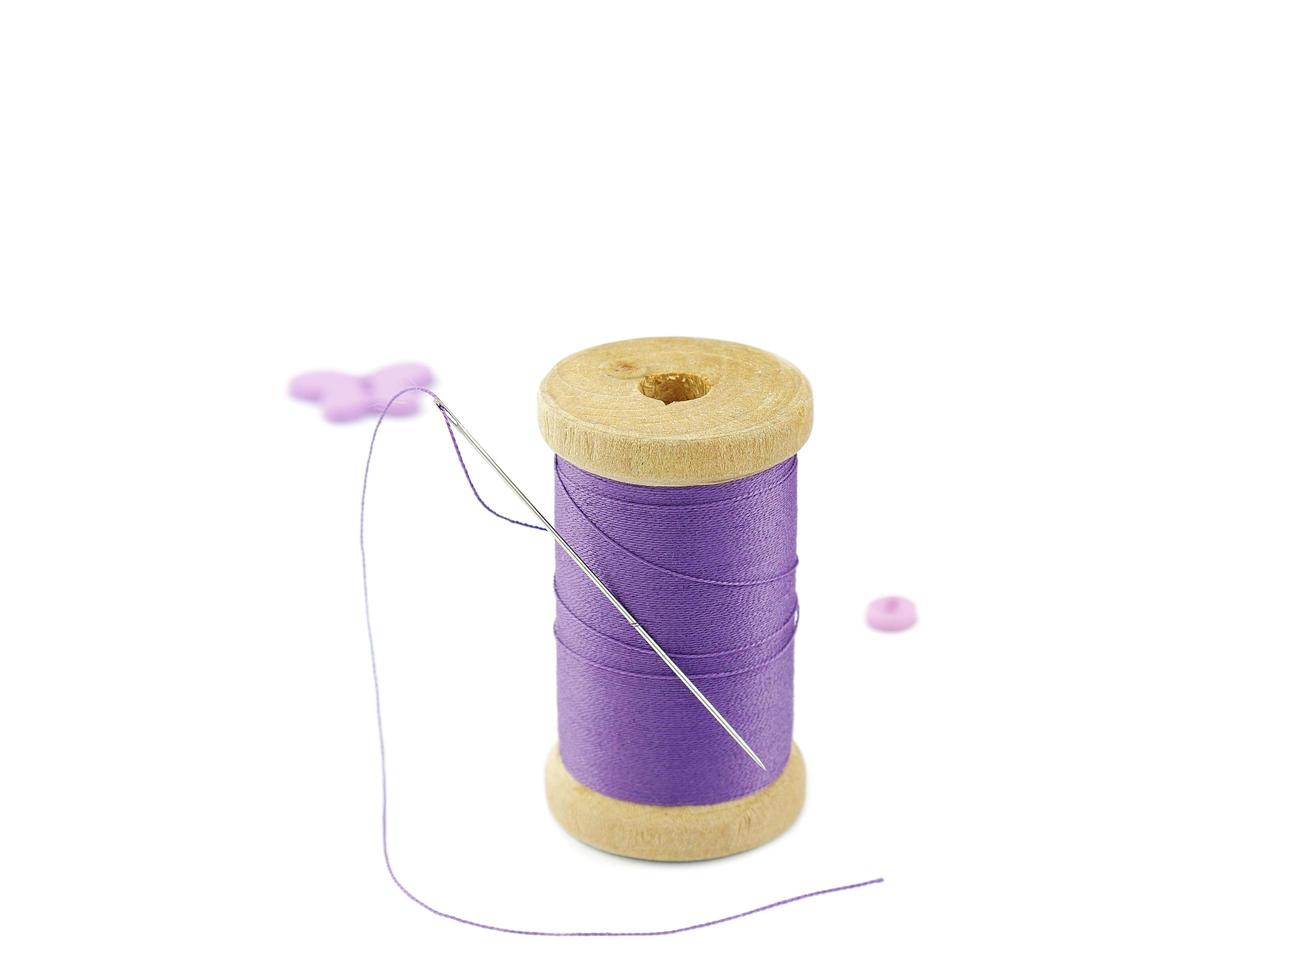 Isolated wooden spool of thread embroidery work object over white background photo